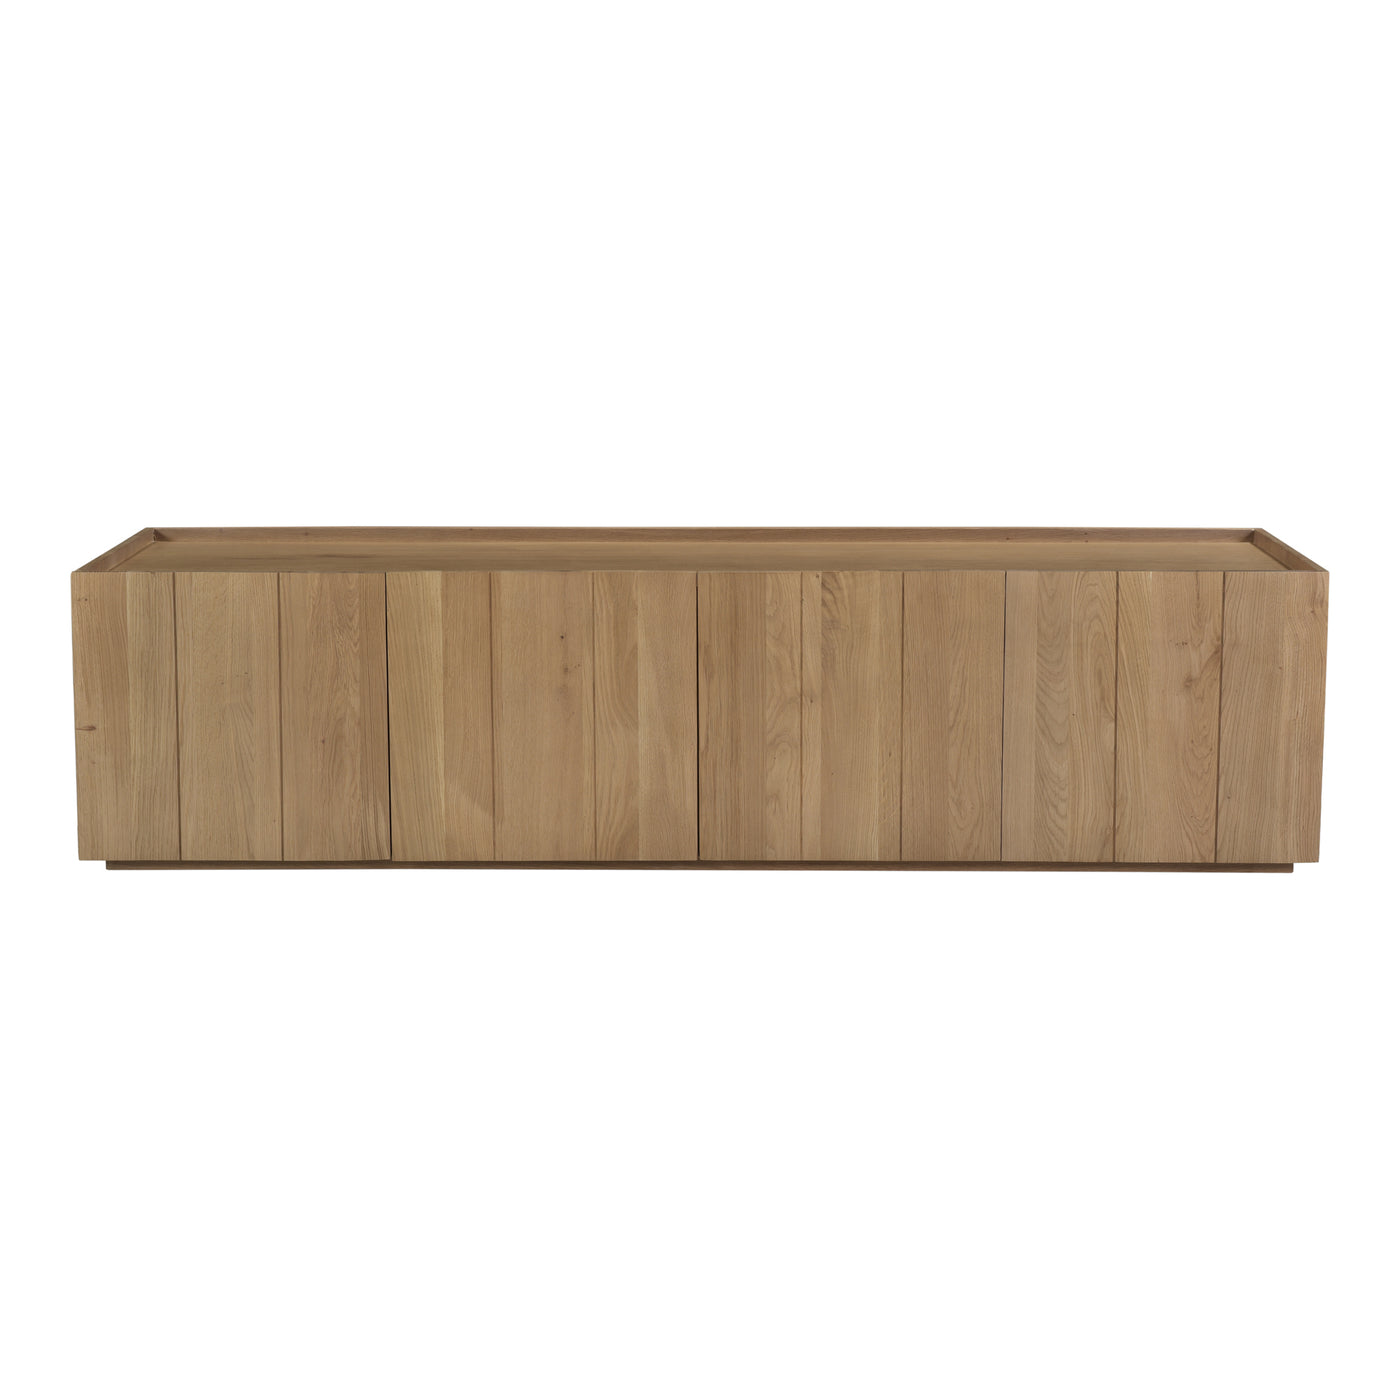 A media cabinet made from naturally finished solid oak, Plank brings about all the organic energy and contemporary style t...